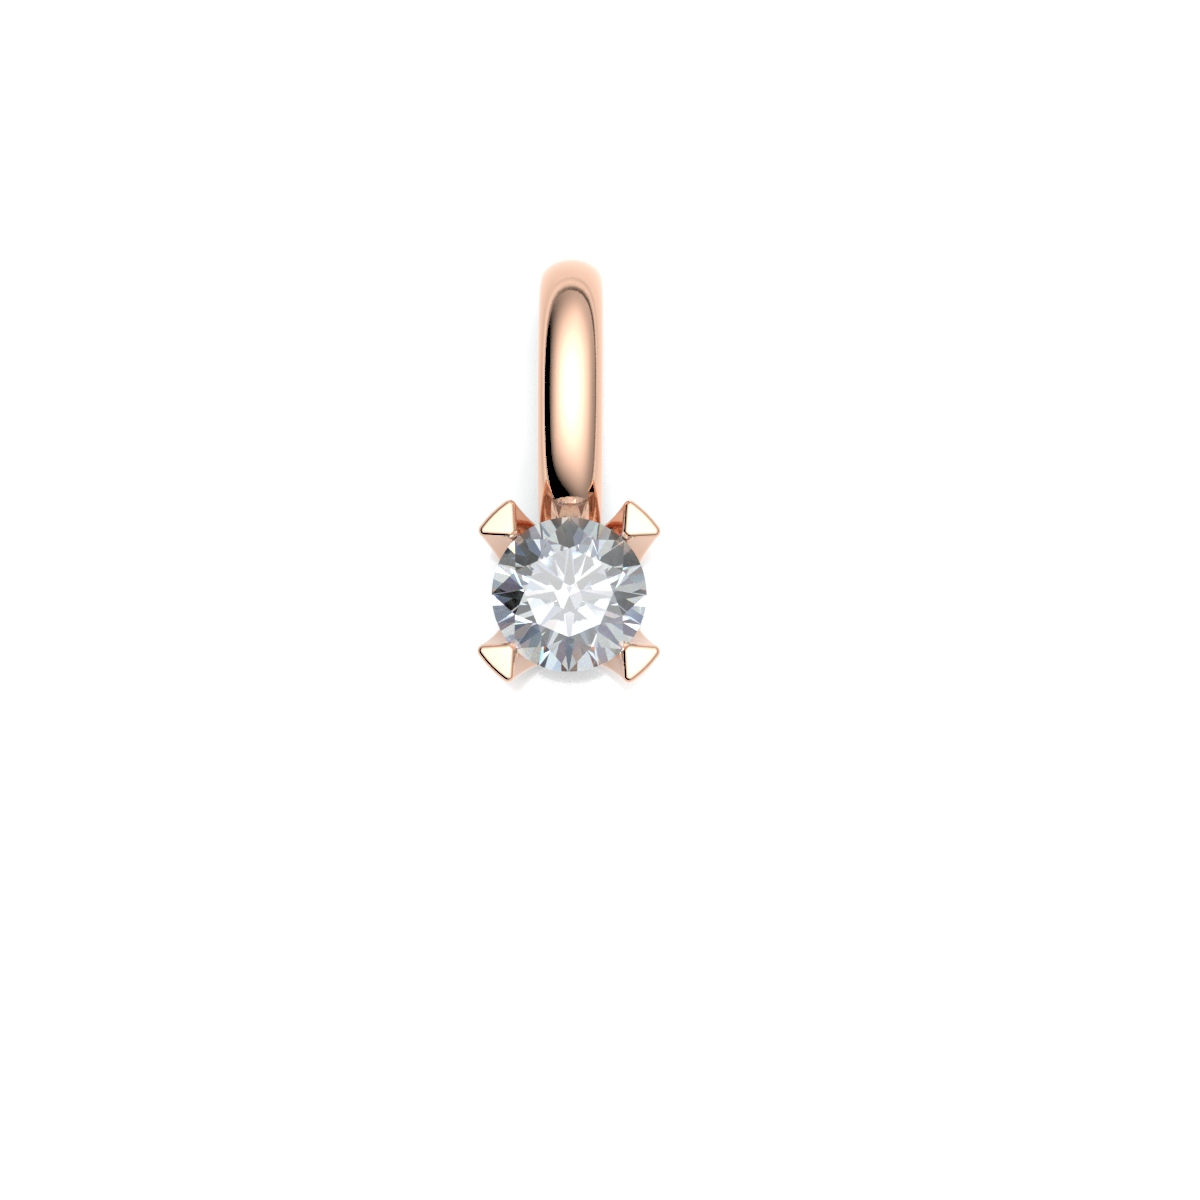 212798-4034-001 | Anhänger Aalen 212798 375 Rotgold<br> Brillant 0,150 ct H-SI ∅ 3.4mm<br>100% Made in Germany  